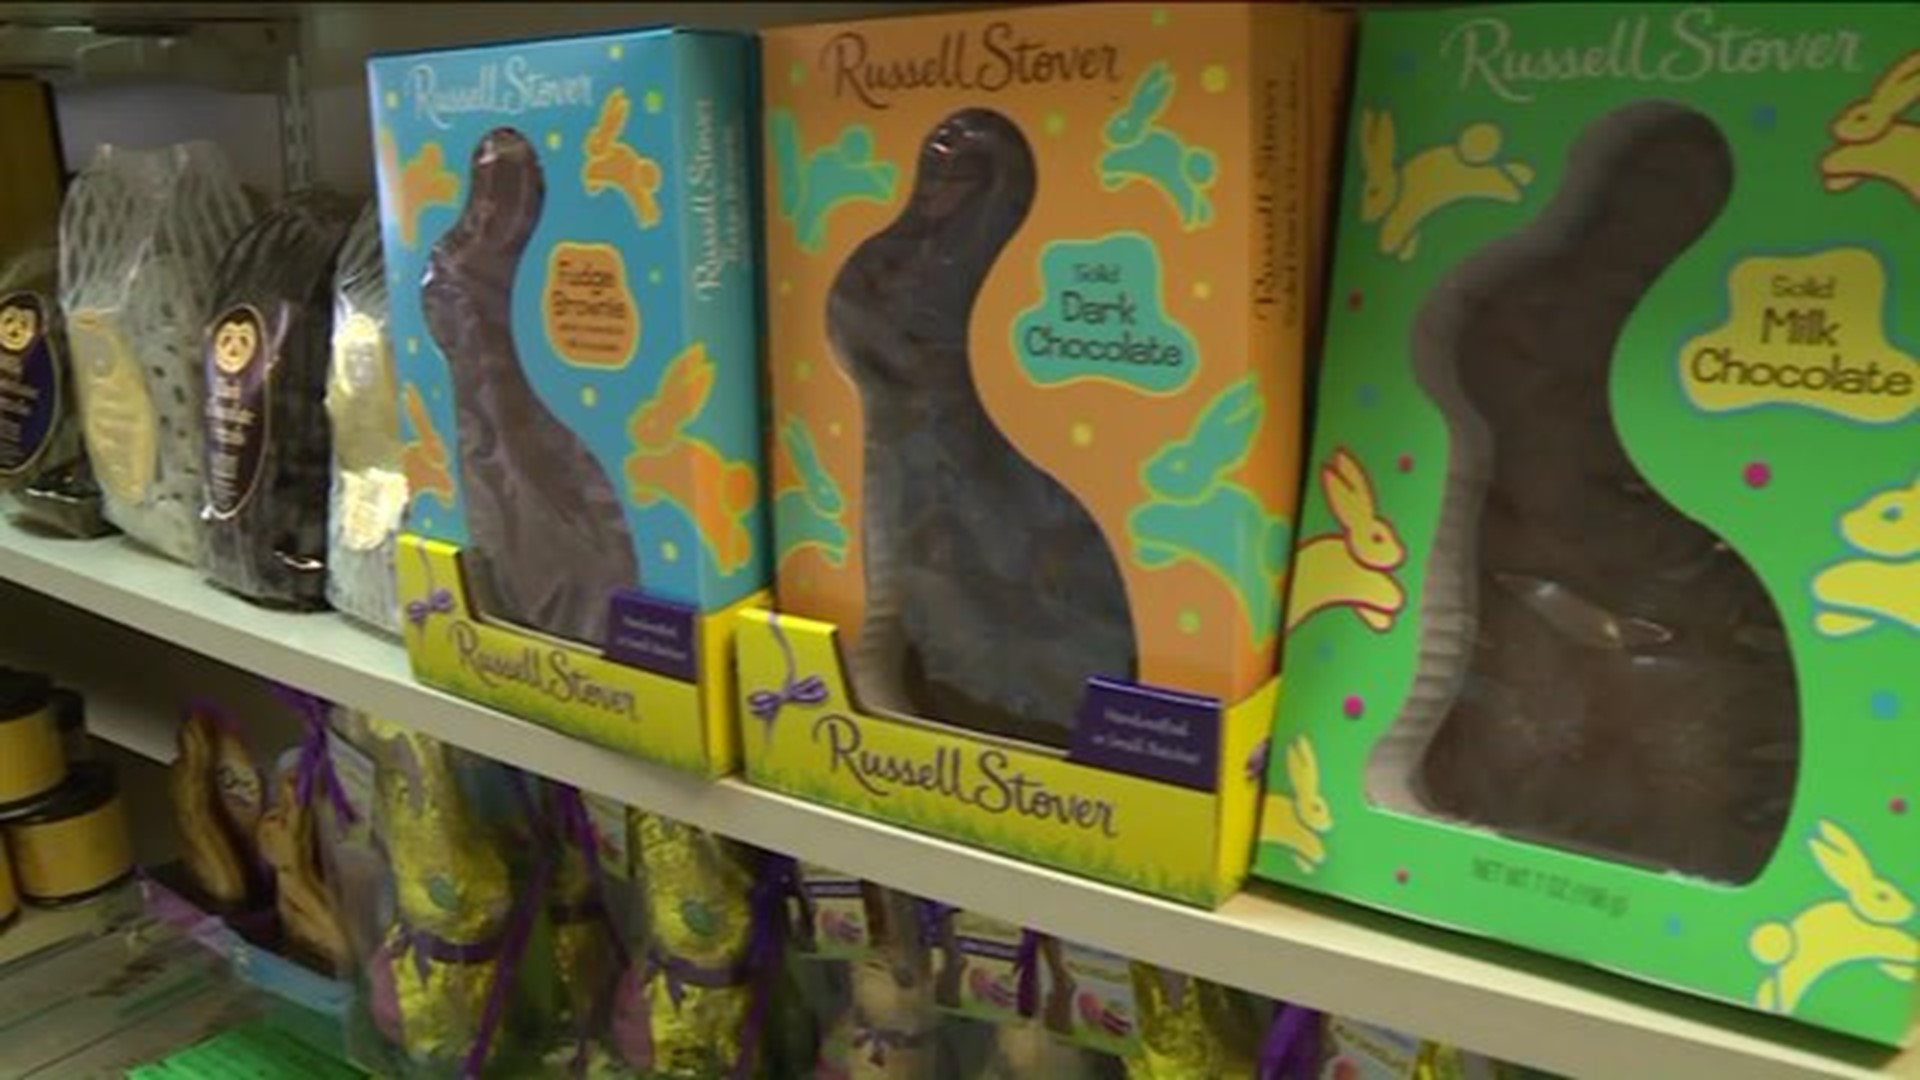 Spending more on Easter celebrations than ever before